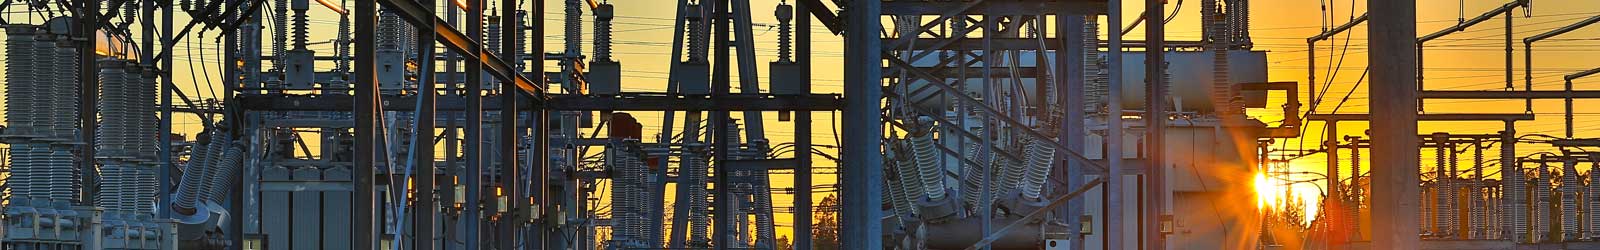 Sunset at a substation with electrical equipment in the foreground.